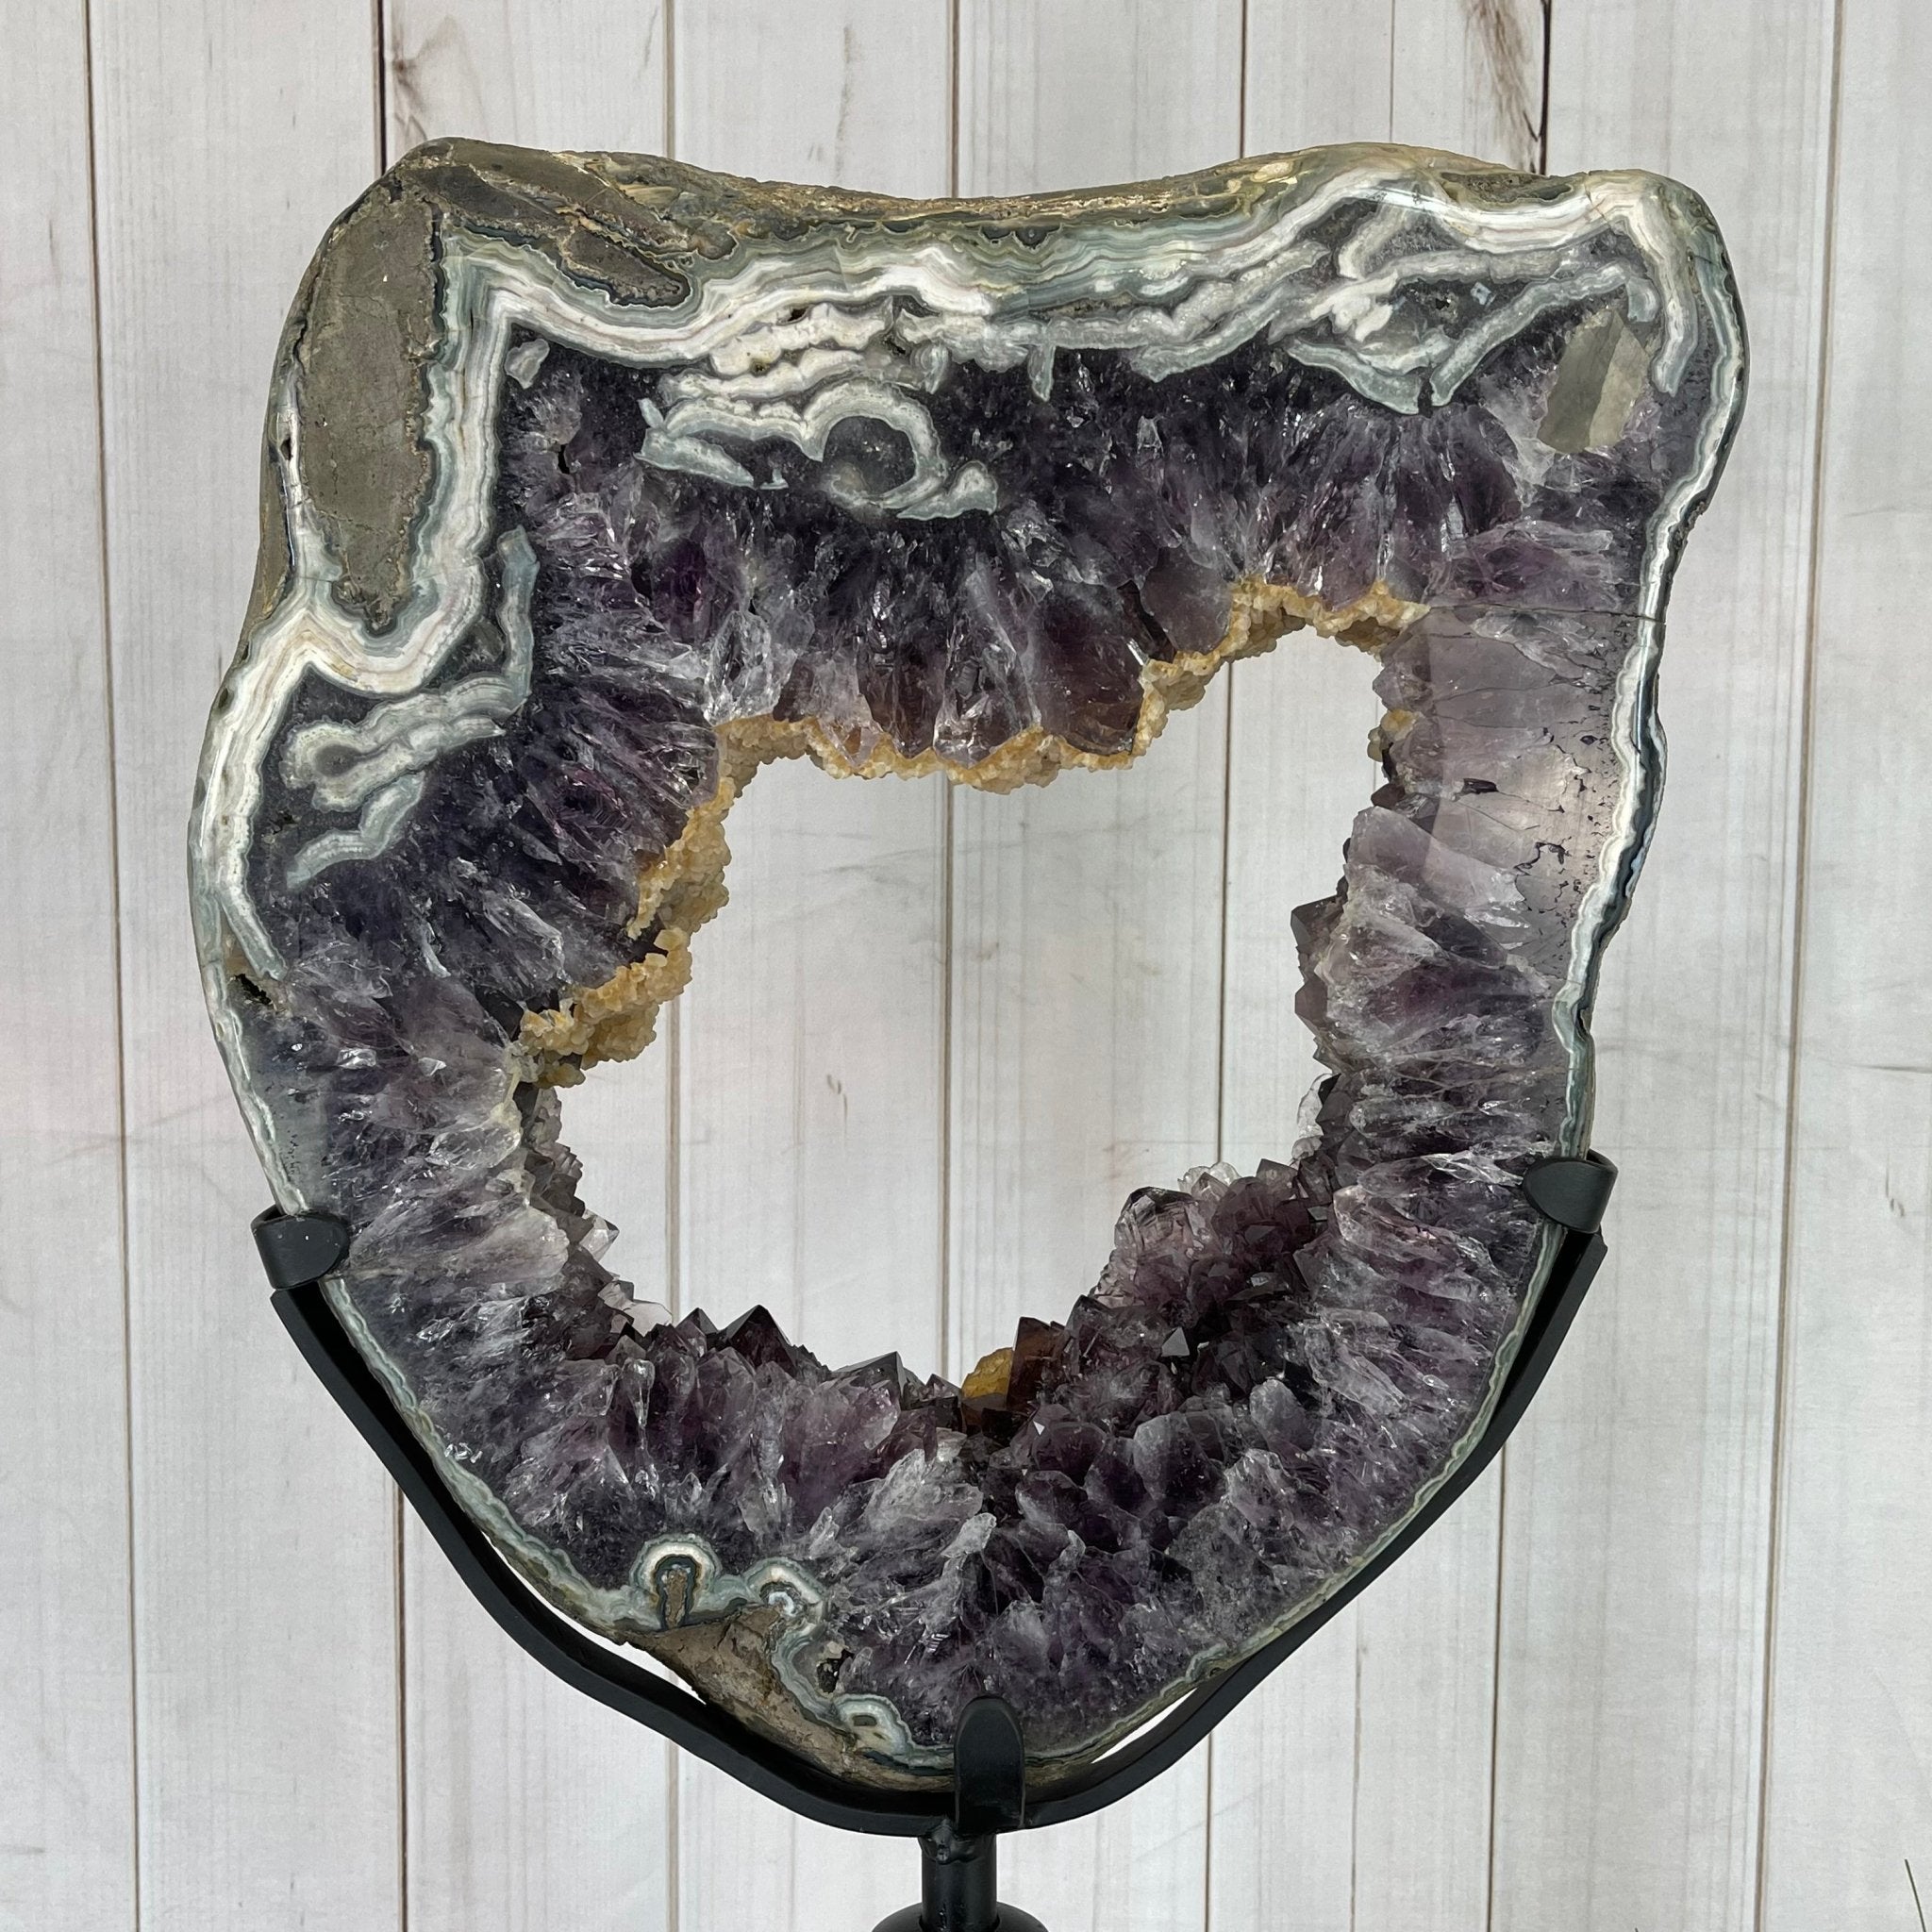 Extra Quality Brazilian Amethyst Crystal Portal on a Tall Rotating Stand, 92.6 lbs & 70.75" tall Model #5604-0105 by Brazil Gems - Brazil GemsBrazil GemsExtra Quality Brazilian Amethyst Crystal Portal on a Tall Rotating Stand, 92.6 lbs & 70.75" tall Model #5604-0105 by Brazil GemsPortals on Rotating Bases5604-0105